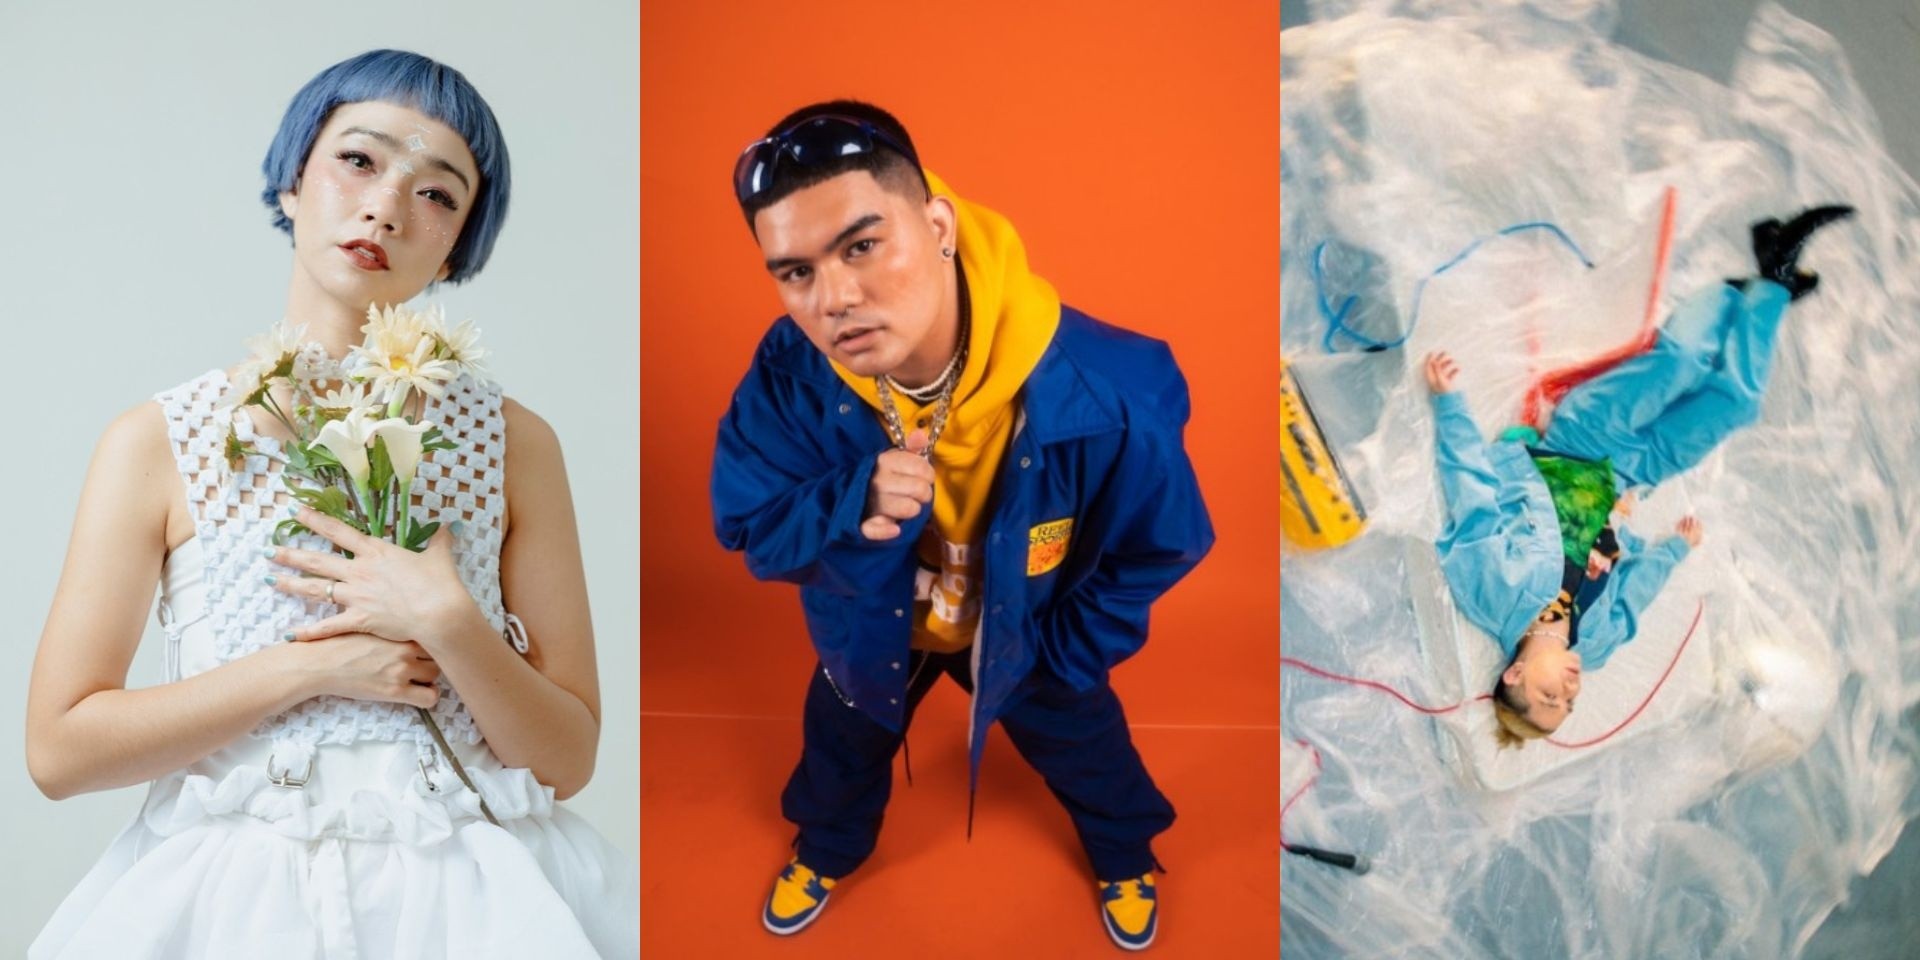 Alisson Shore, Tanayu, Rude-a, and more join forces for collaborative music project for Basketball World Cup 2023